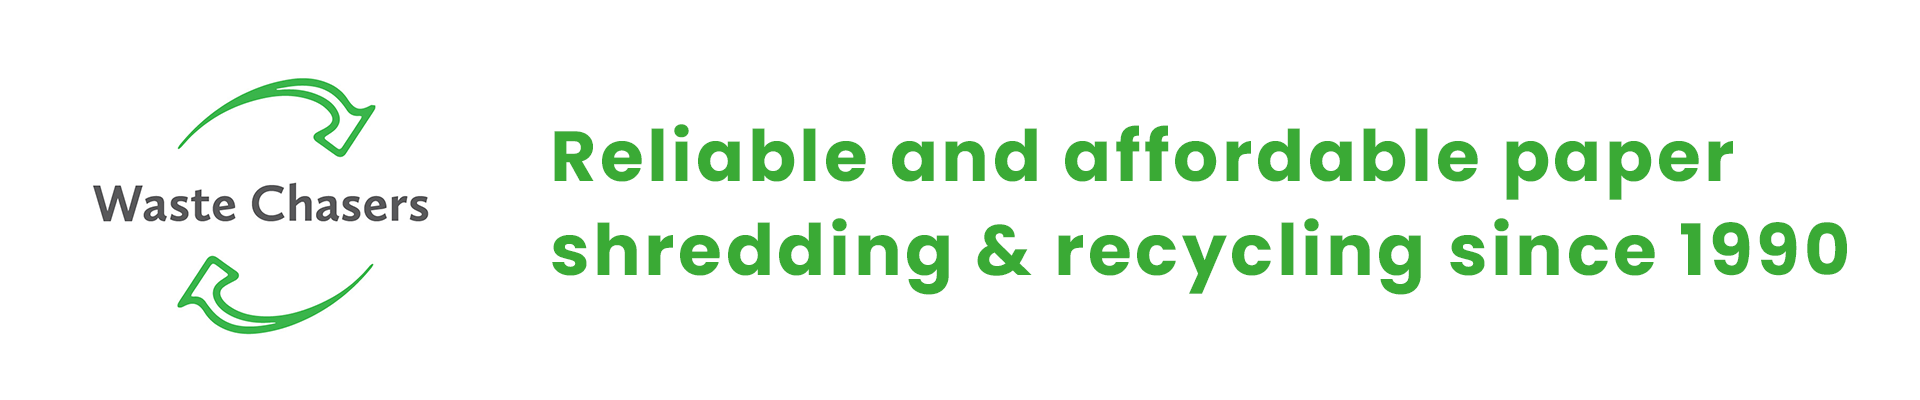 reliable and affordable paper shredding and recycling